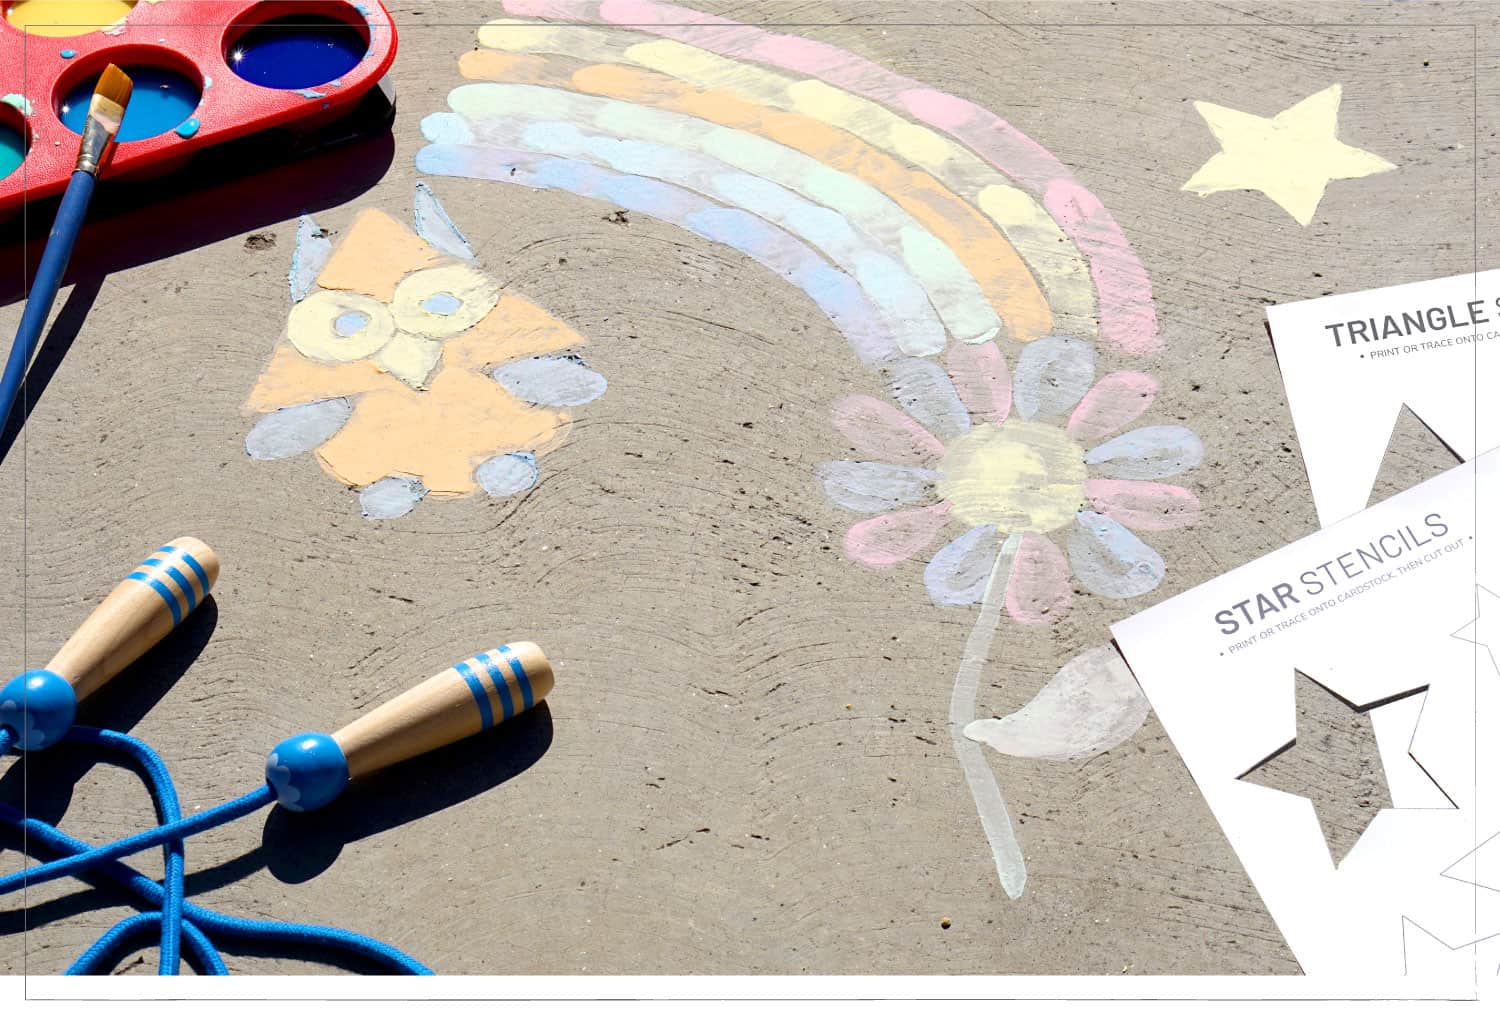 DIY Chalk Paint: Stress Free Summer Activity for All Ages /// By Faith Provencher of Design Fixation with Julia Morrissey #chalkpaint #diy #kids #summer